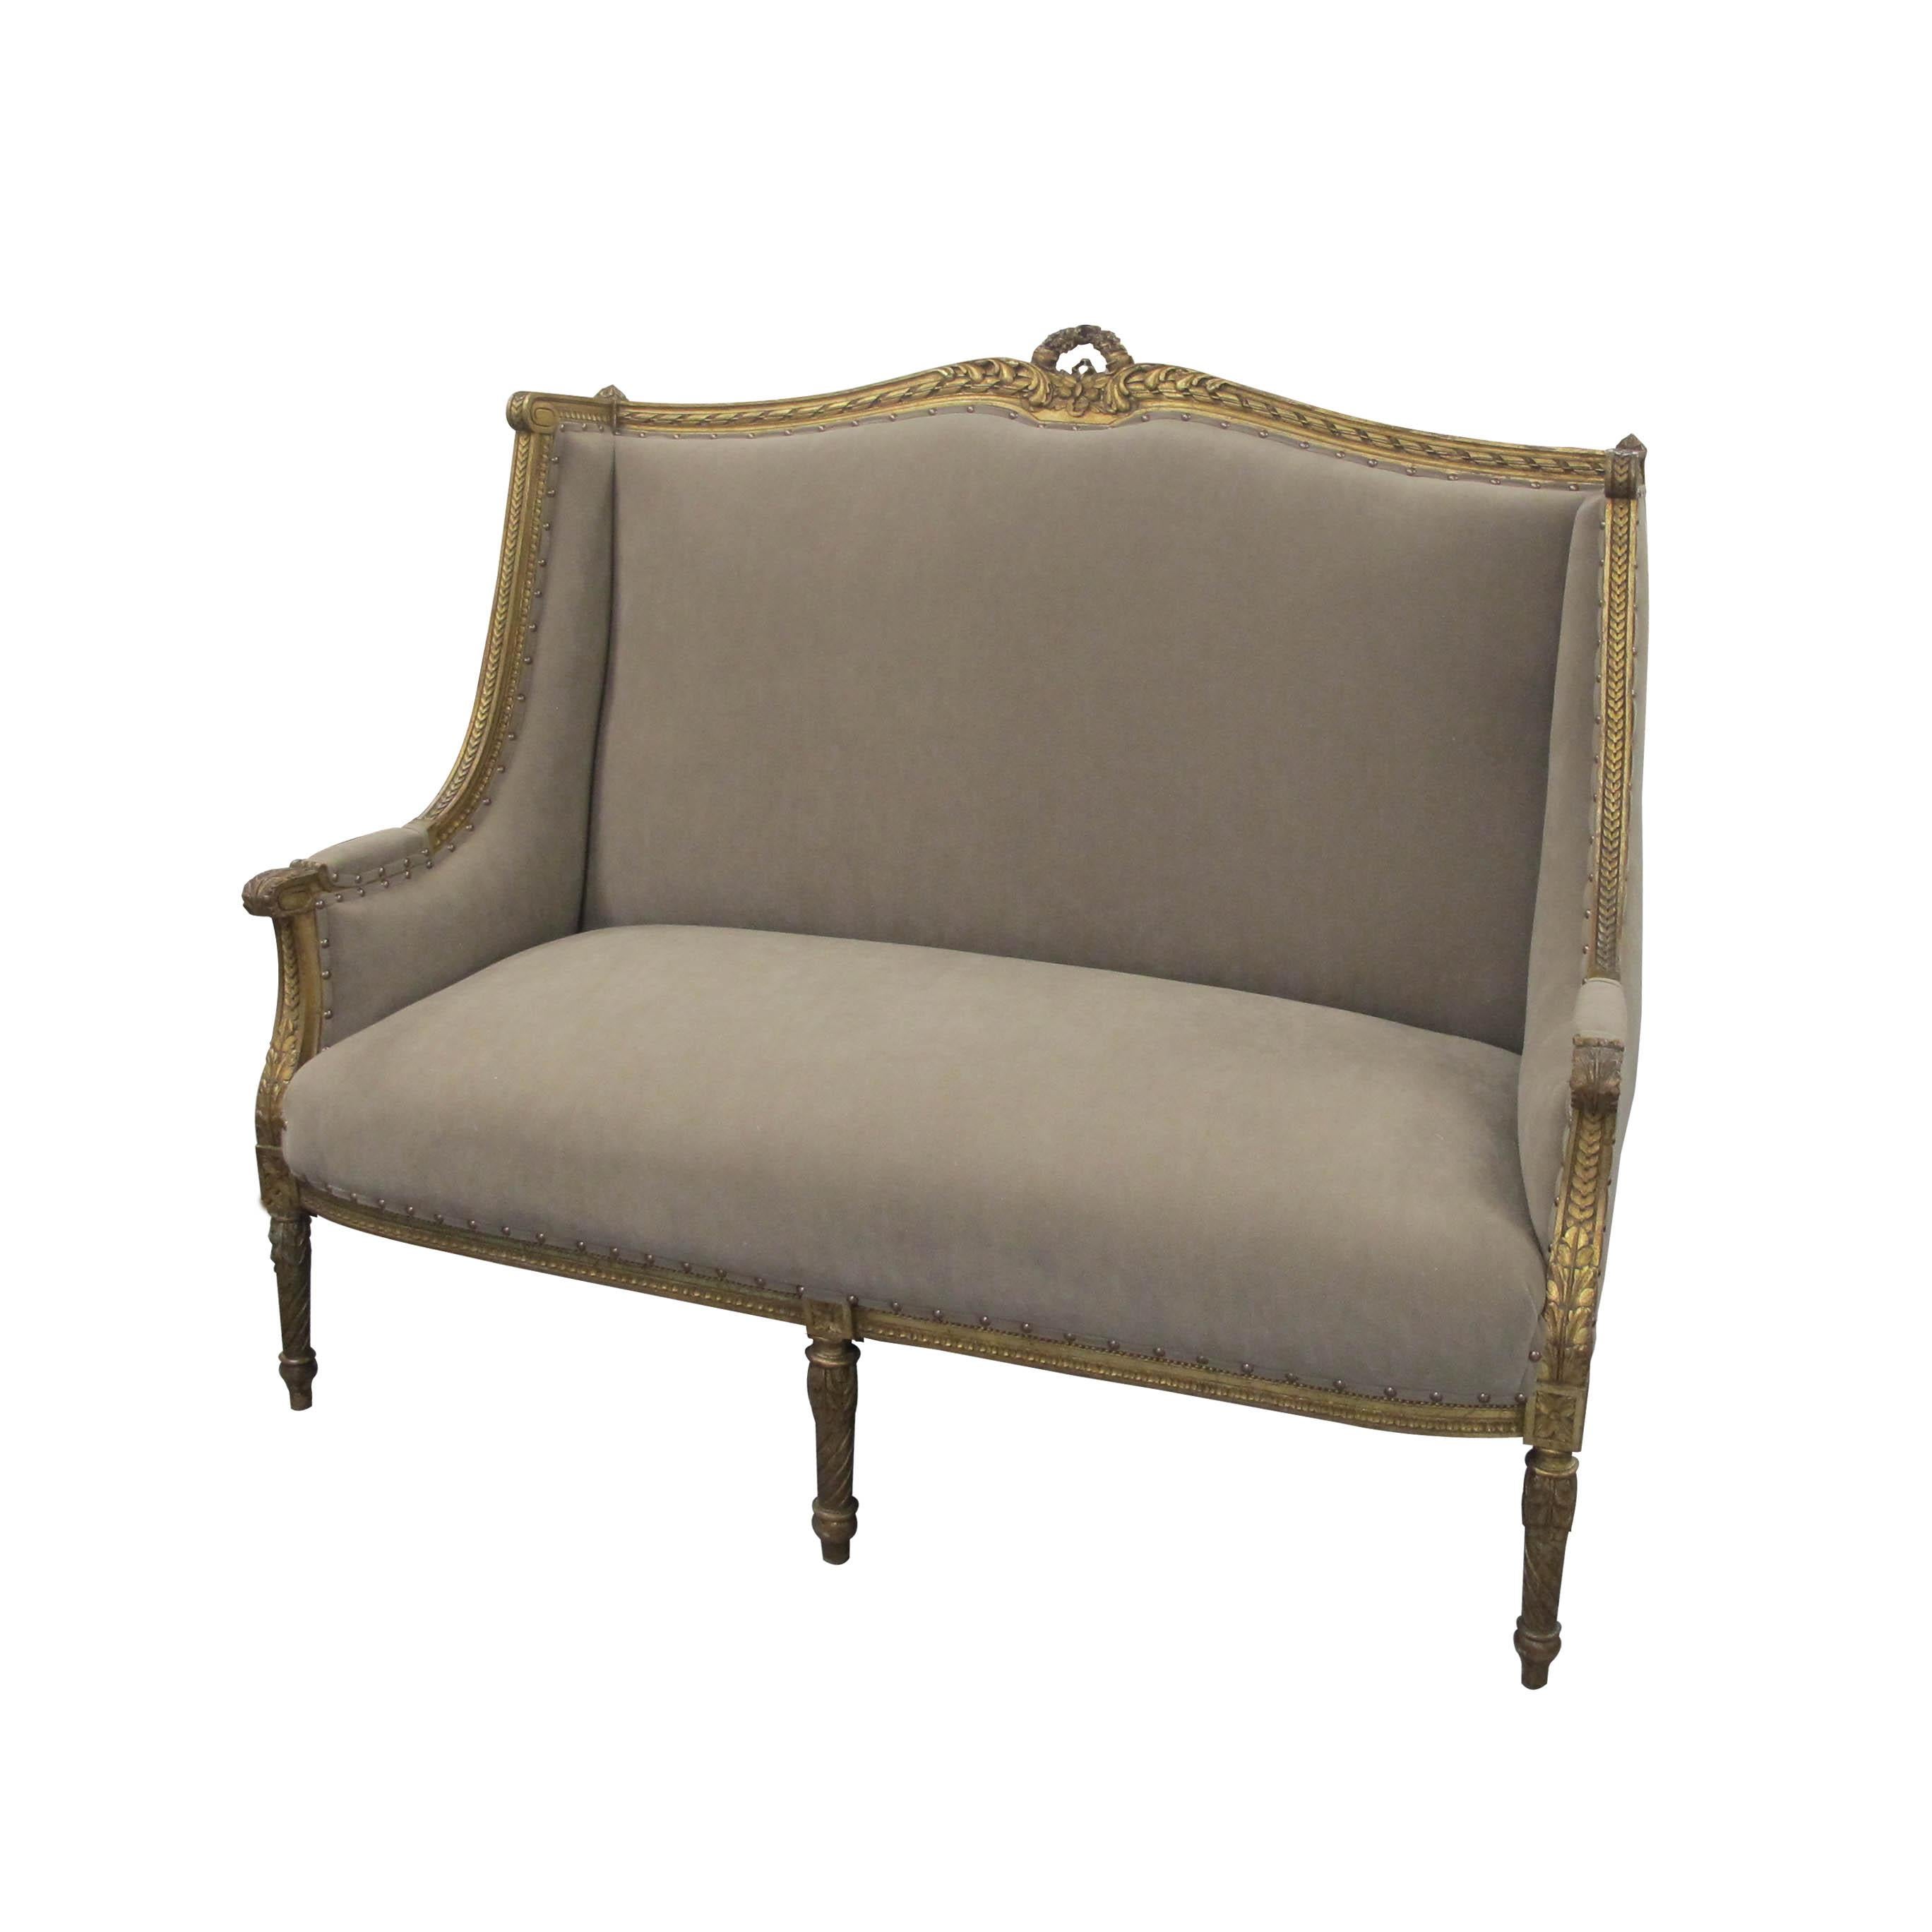 A generous high-backed two-seat French marquise, circa 1880 Louis the XVI style sofa. Newly upholstered with a suede like Impala fabric, in a light brown color, with antiqued studs, easy to clean and very resistant. The Marquise boasts very elegant